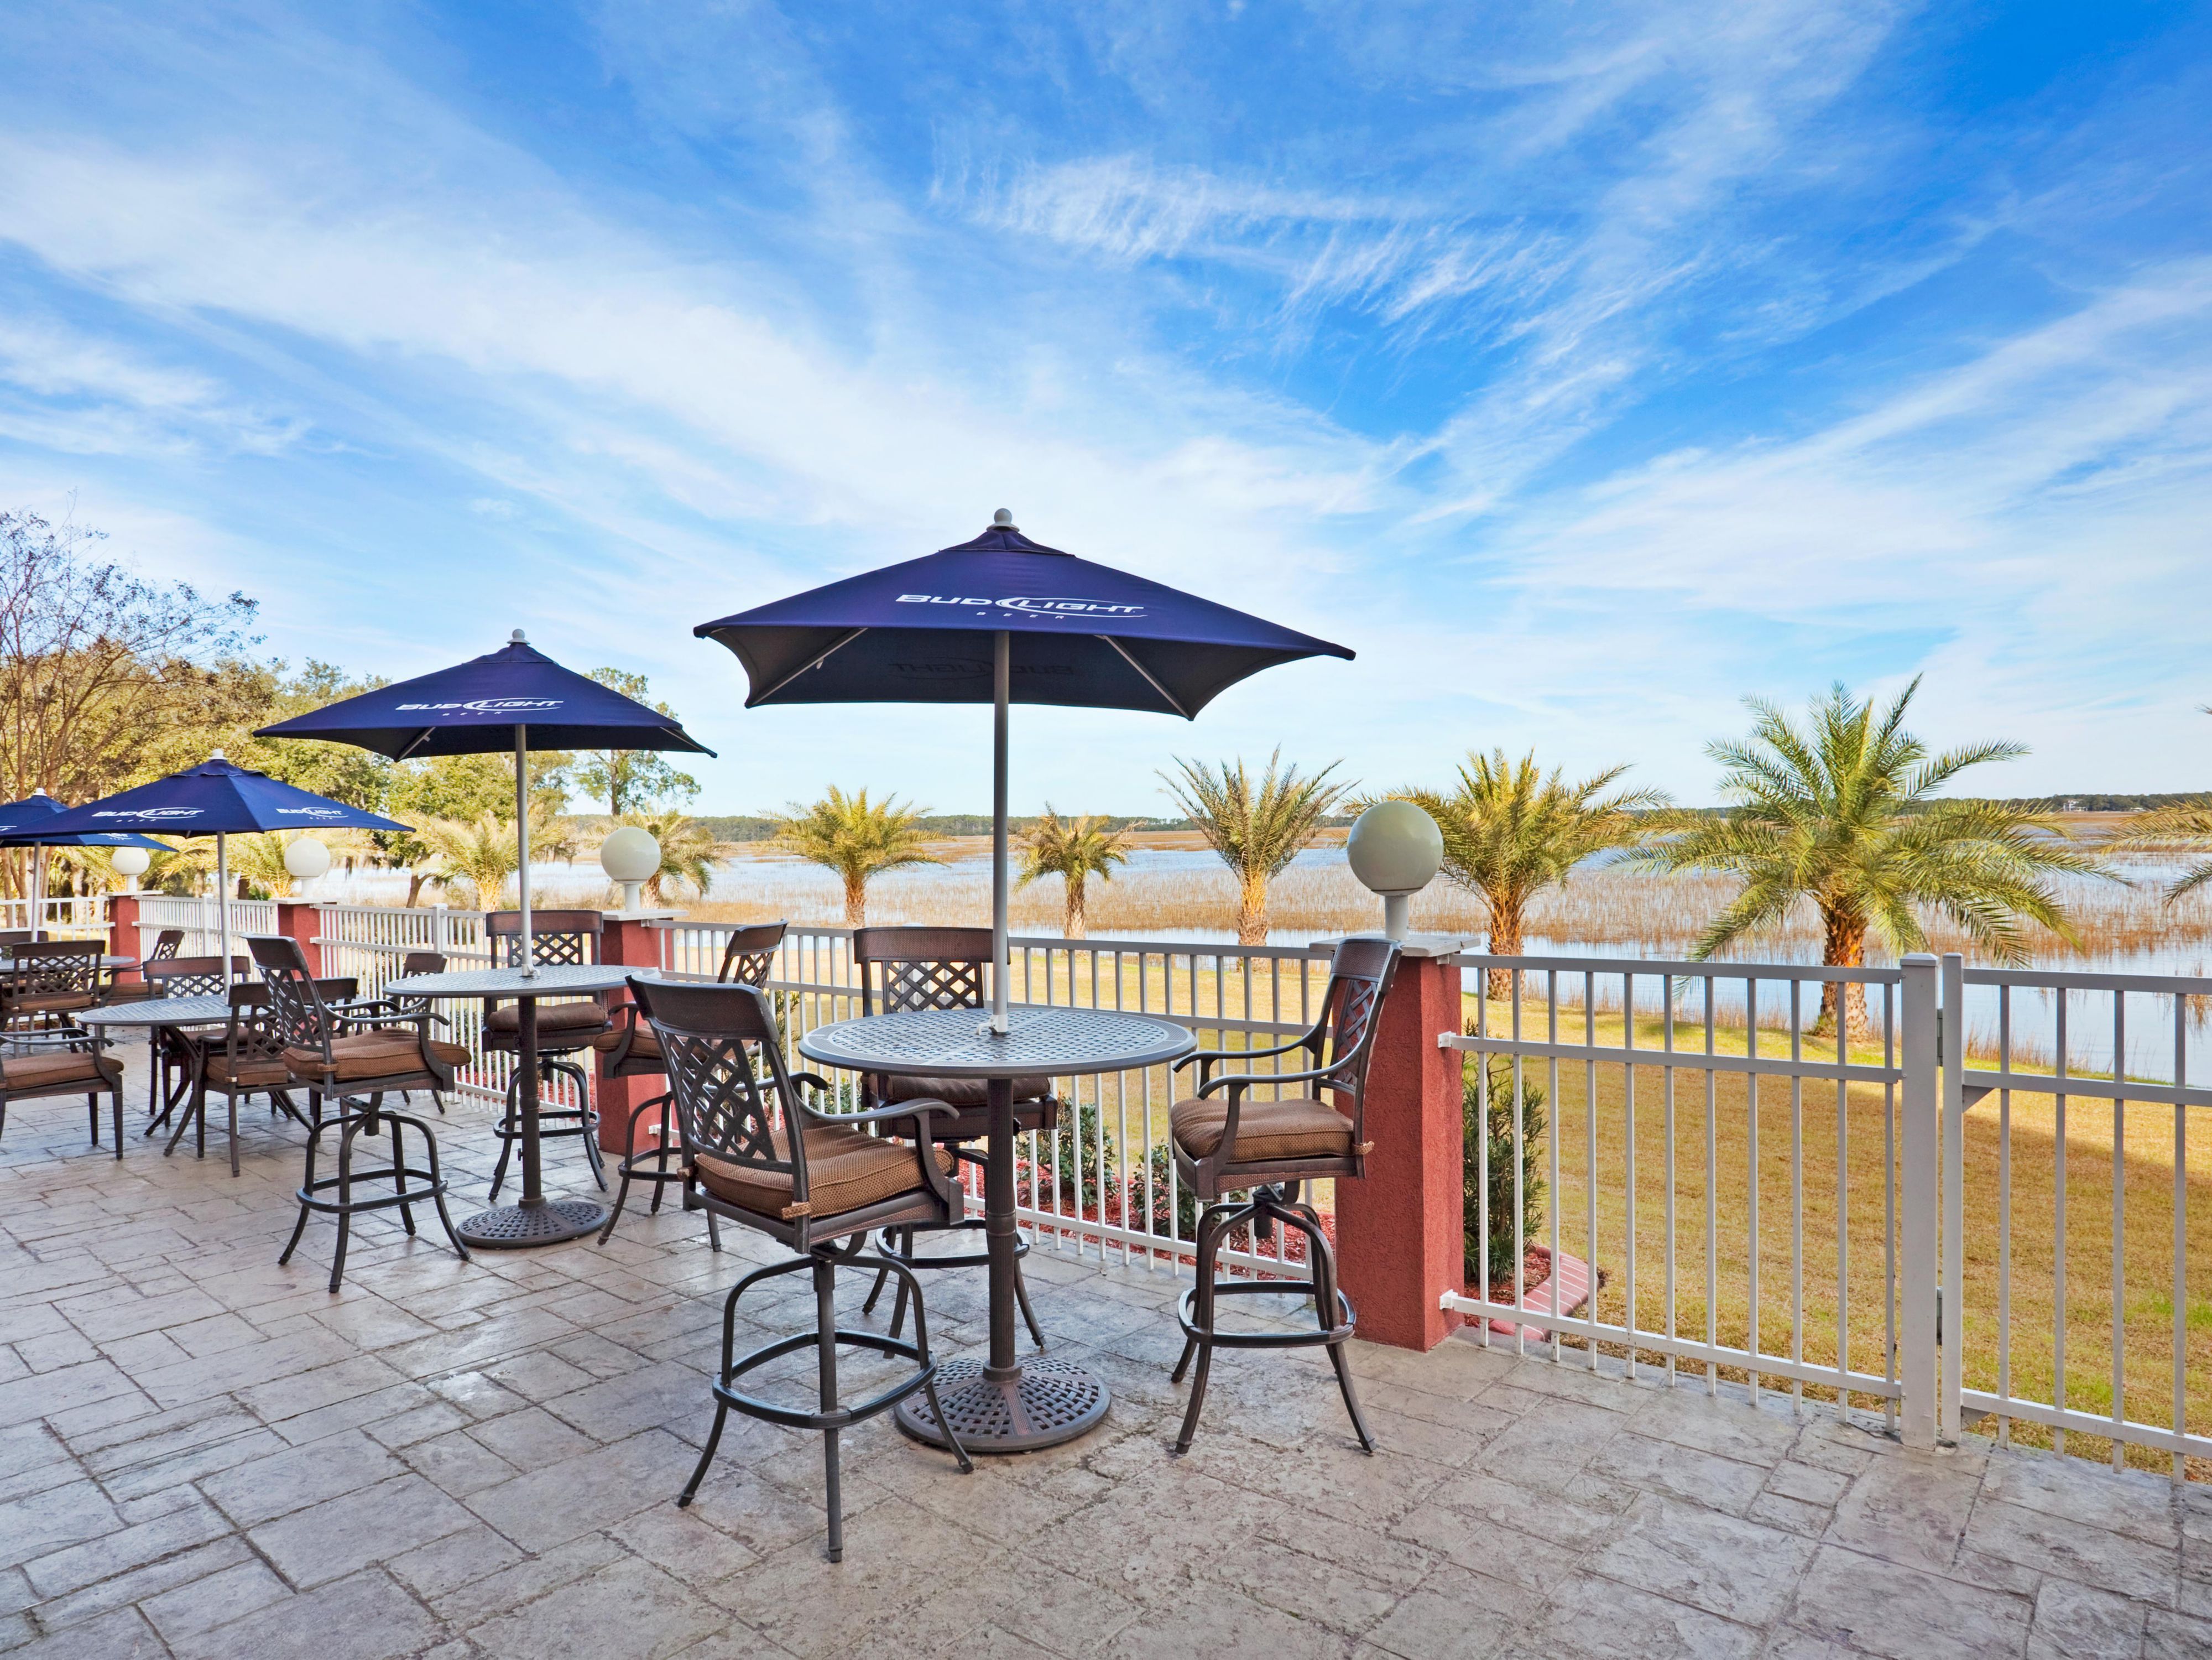 The Tides Bar & Grill offers our guests their favorite beverages along with a selection of tasty bites by our chef including his award-winning Shrimp & Grits.  You can meet with family or friends on the outdoor patio while enjoying the peaceful water view.